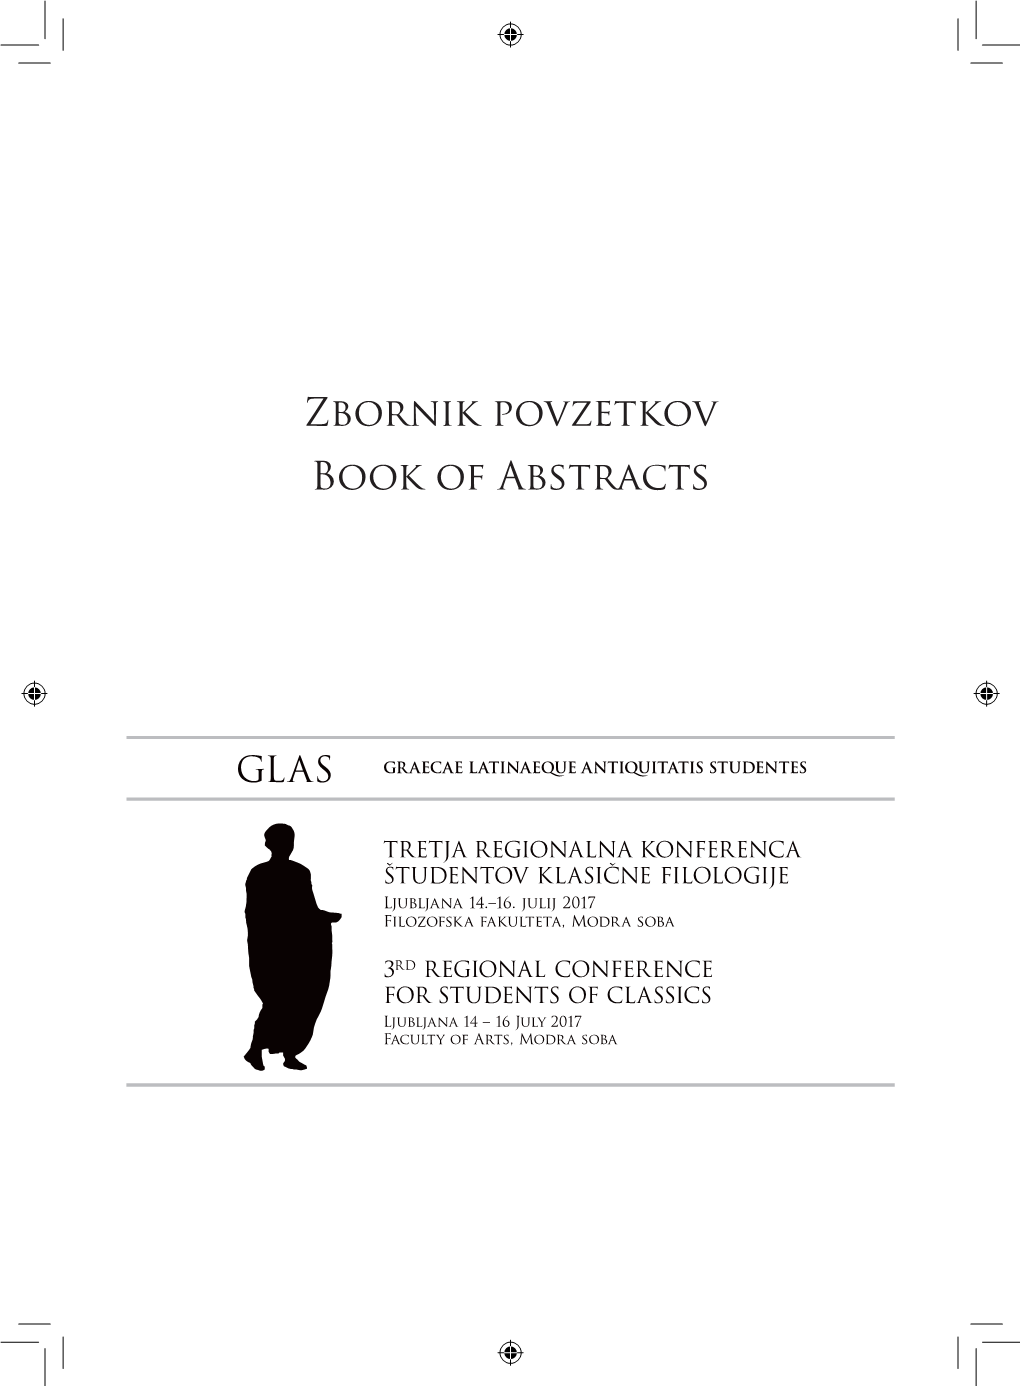 Zbornik Povzetkov Book of Abstracts Book of Abstracts Third Regional Conference for Studentes of Classics GLAS (Graecae Latinaeque Antiquitatis Studentes)